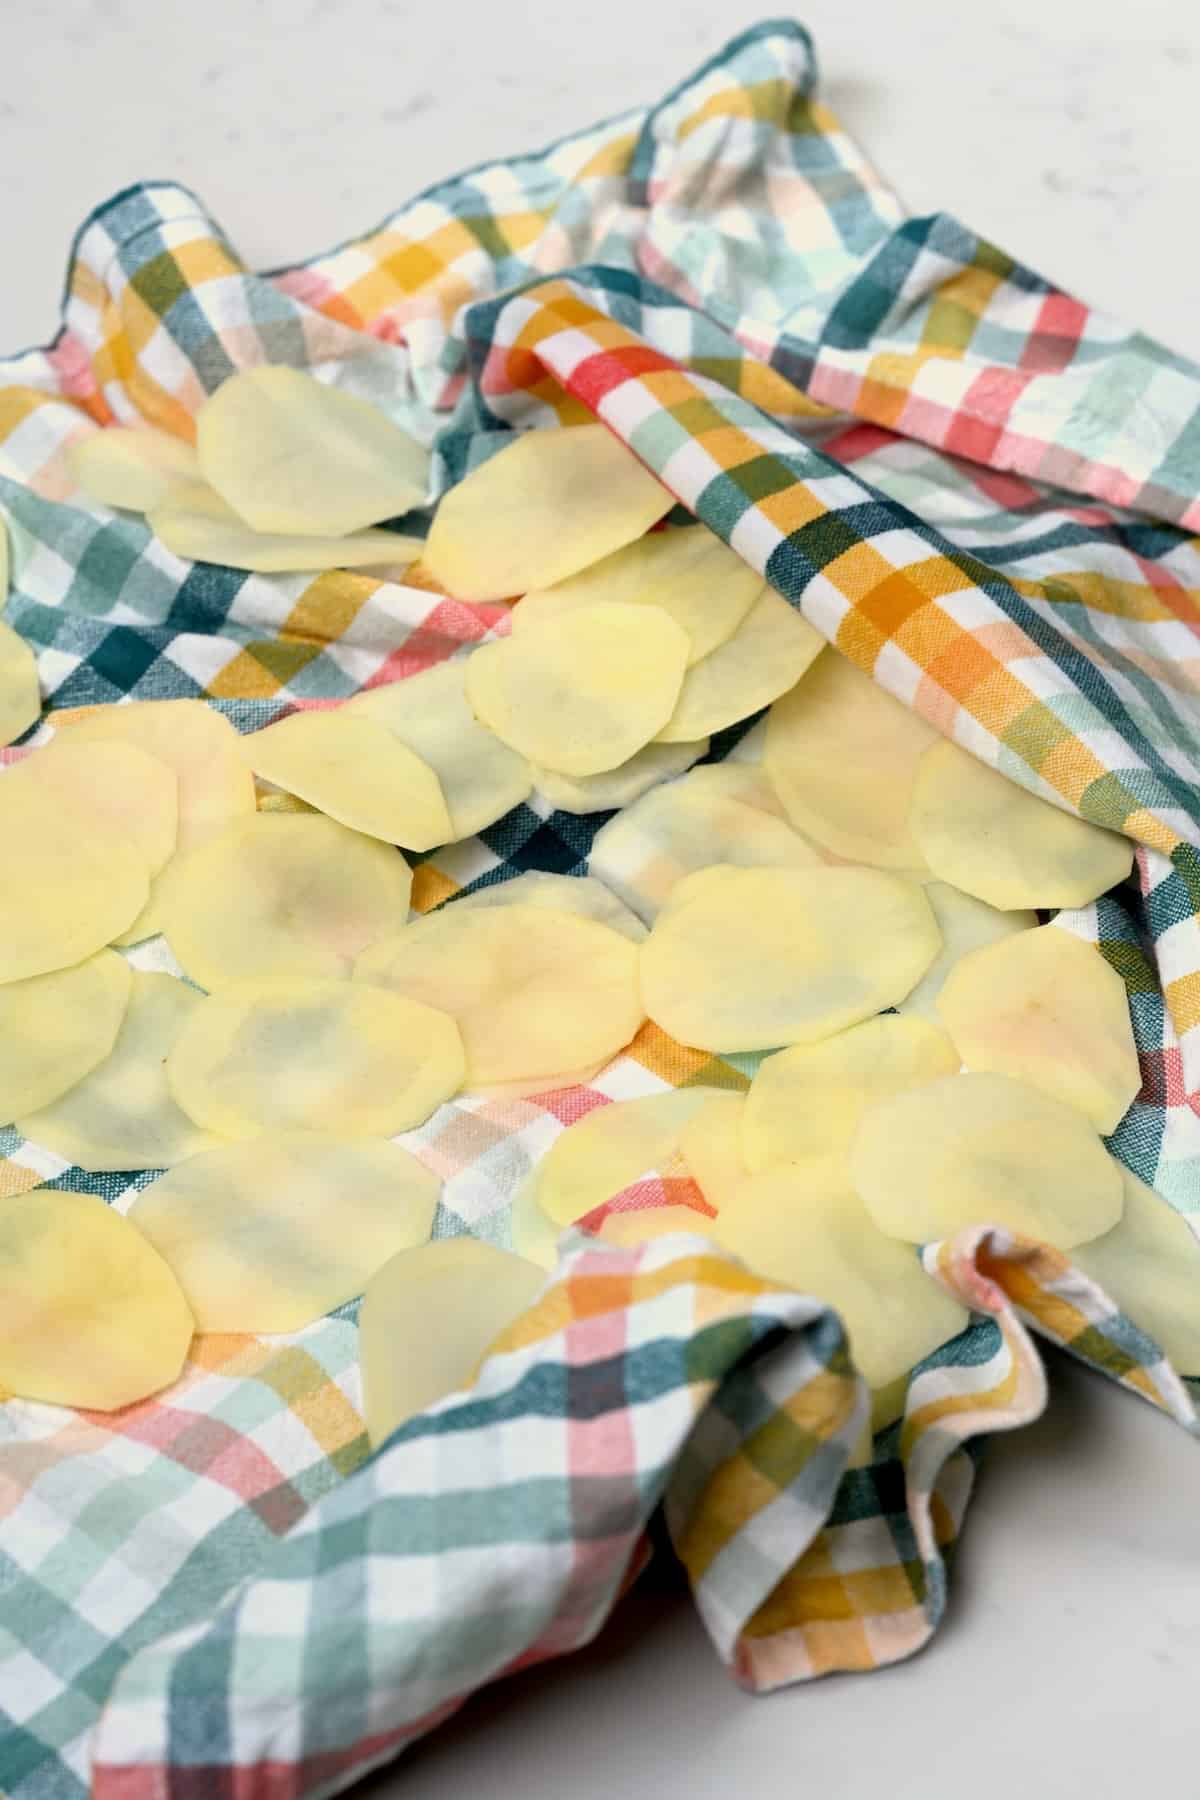 Drying potato slices with kitchen towel